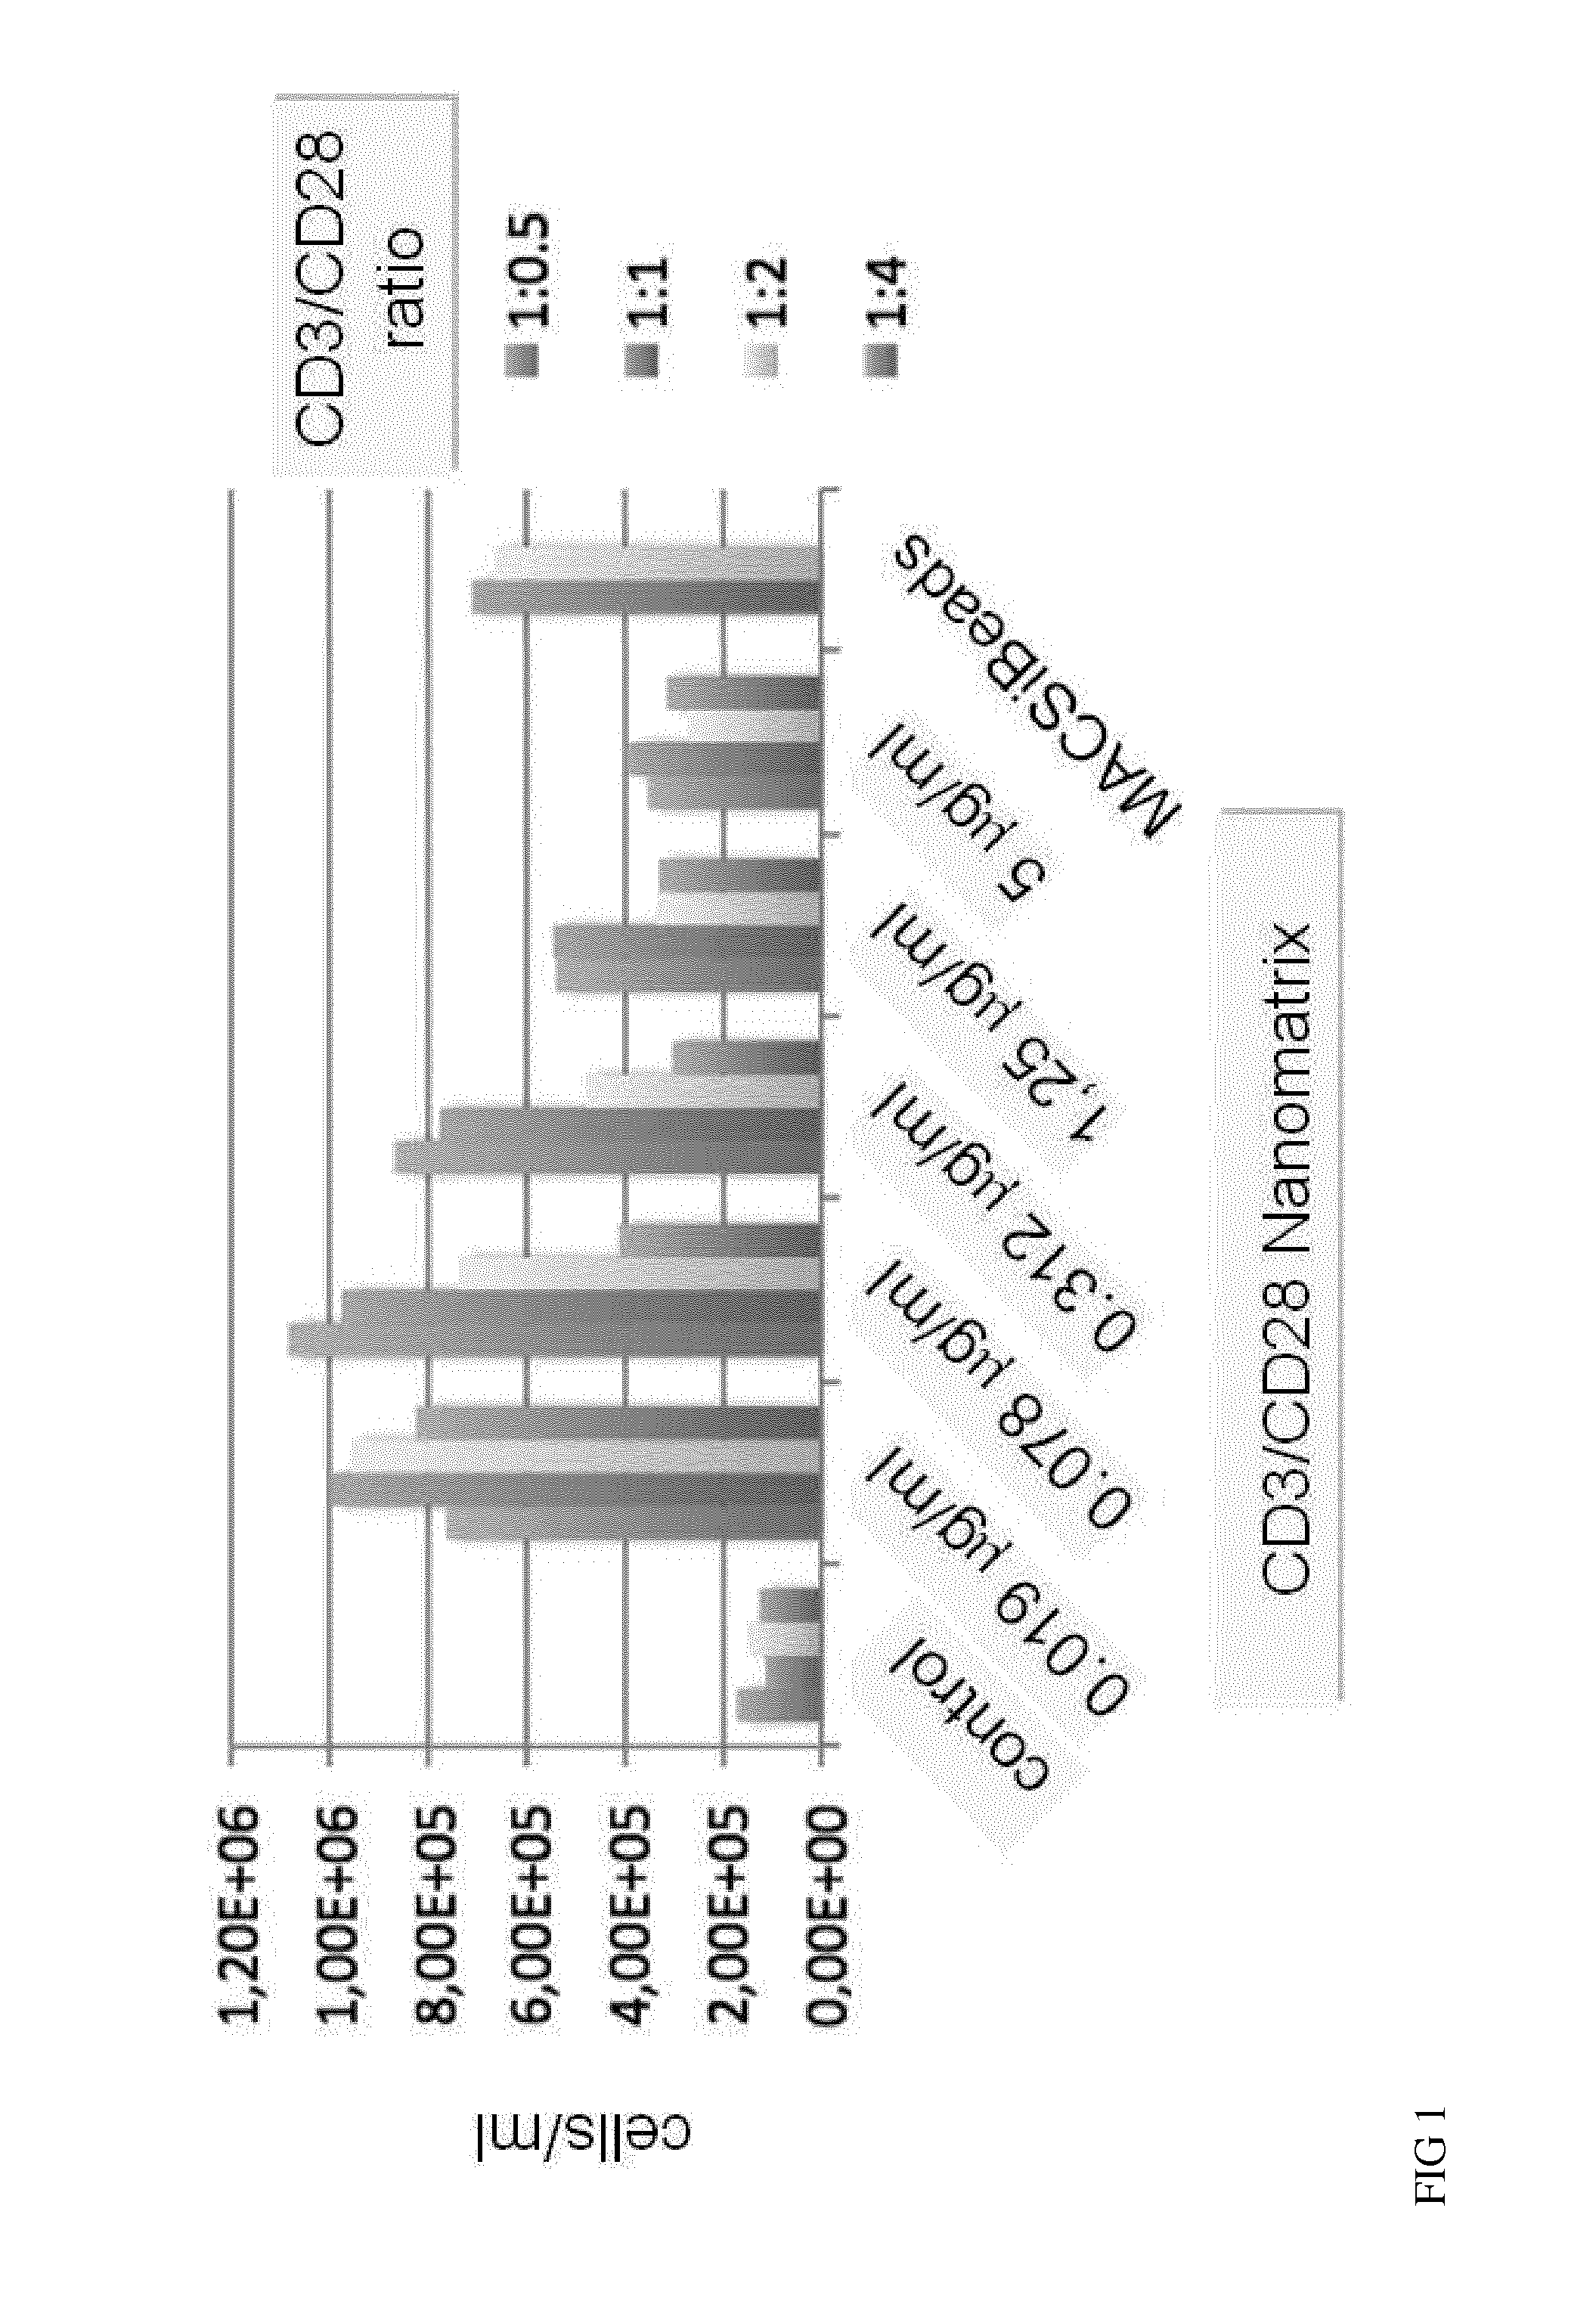 Method for polyclonal stimulation of t cells by mobile nanomatrices